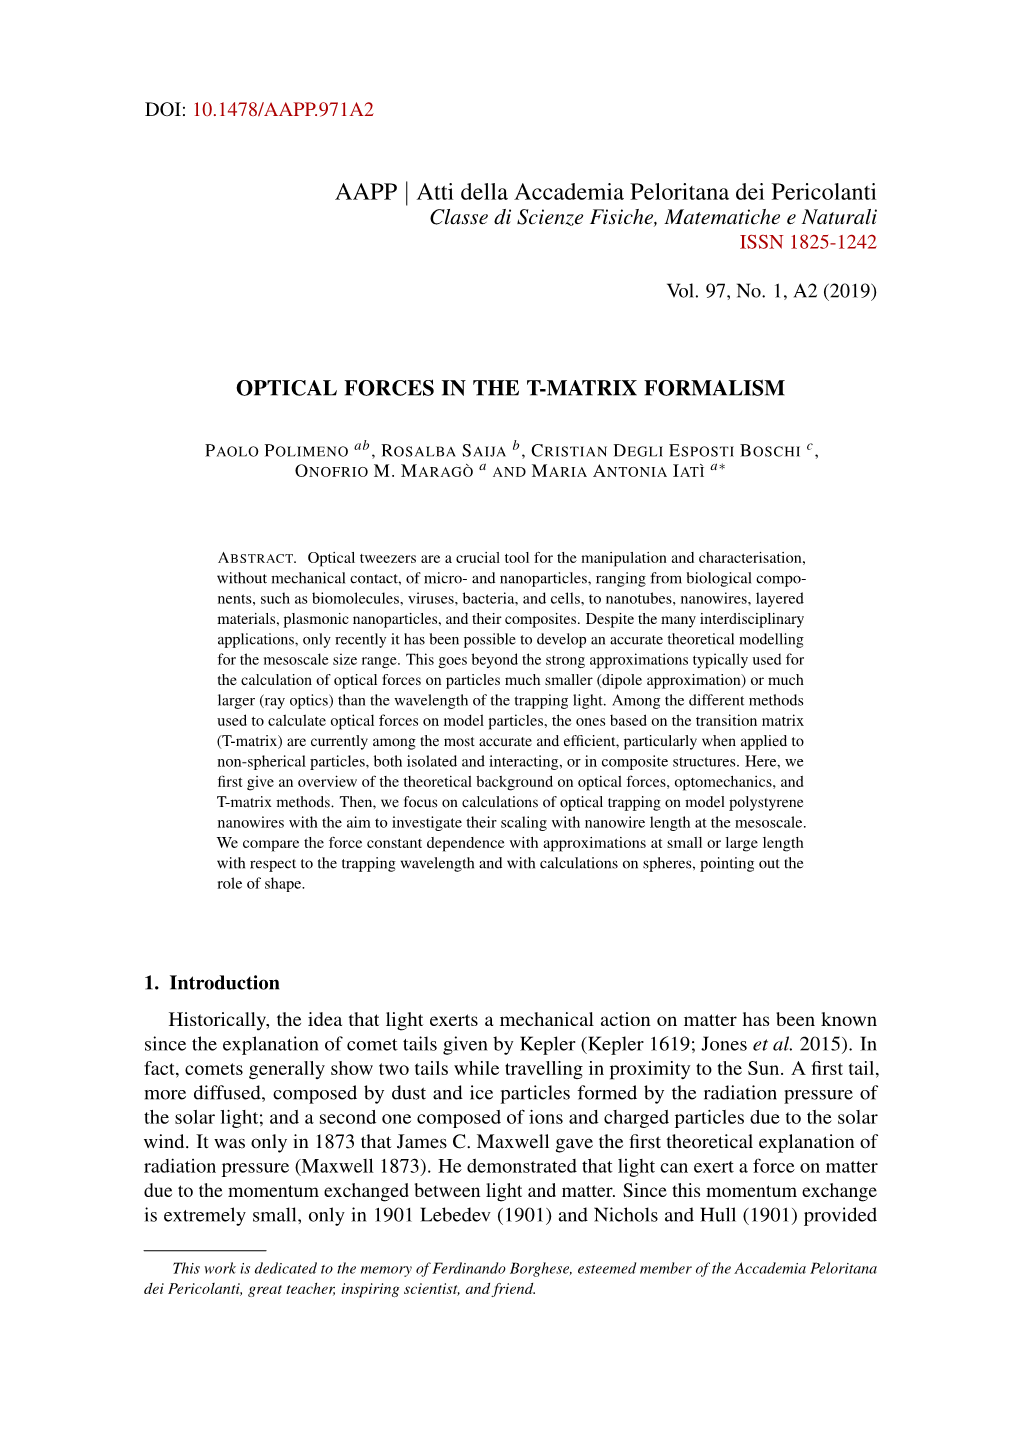 Optical Forces in the T-Matrix Formalism